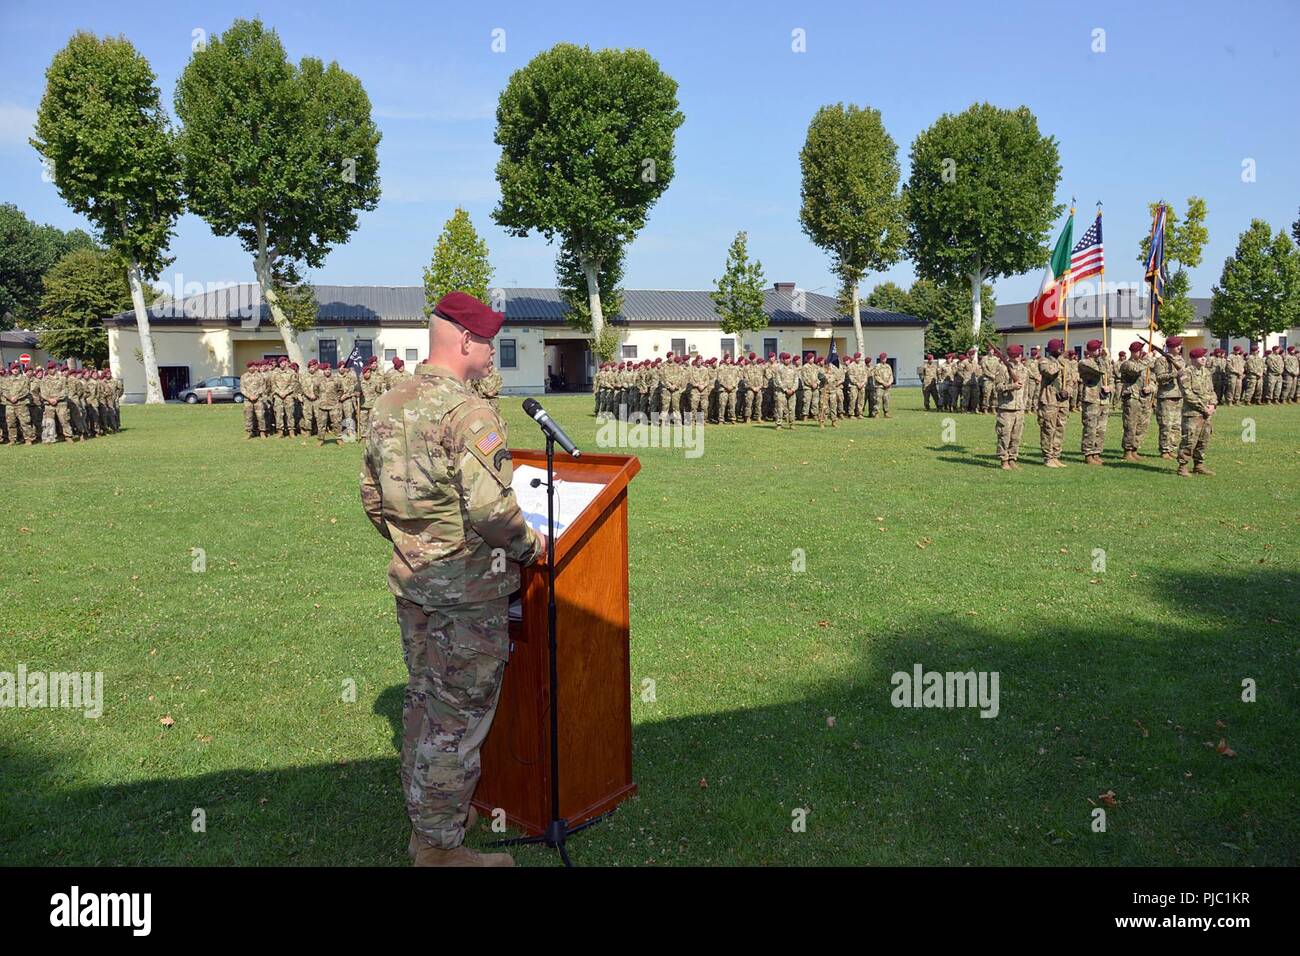 U.S. Army Lt. Col. Robert M. Shaw, commander of 1st Battalion, 503rd Infantry Regiment, 173rd Airborne Brigade, provides remarks during the change of responsibility ceremony at Caserma Ederle in Vicenza, Italy, July 19, 2018. The 173rd Airborne Brigade is the U.S. Army Contingency Response Force in Europe, capable of projecting ready forces anywhere in the U.S. European, Africa or Central Commands' areas of responsibility. Stock Photo